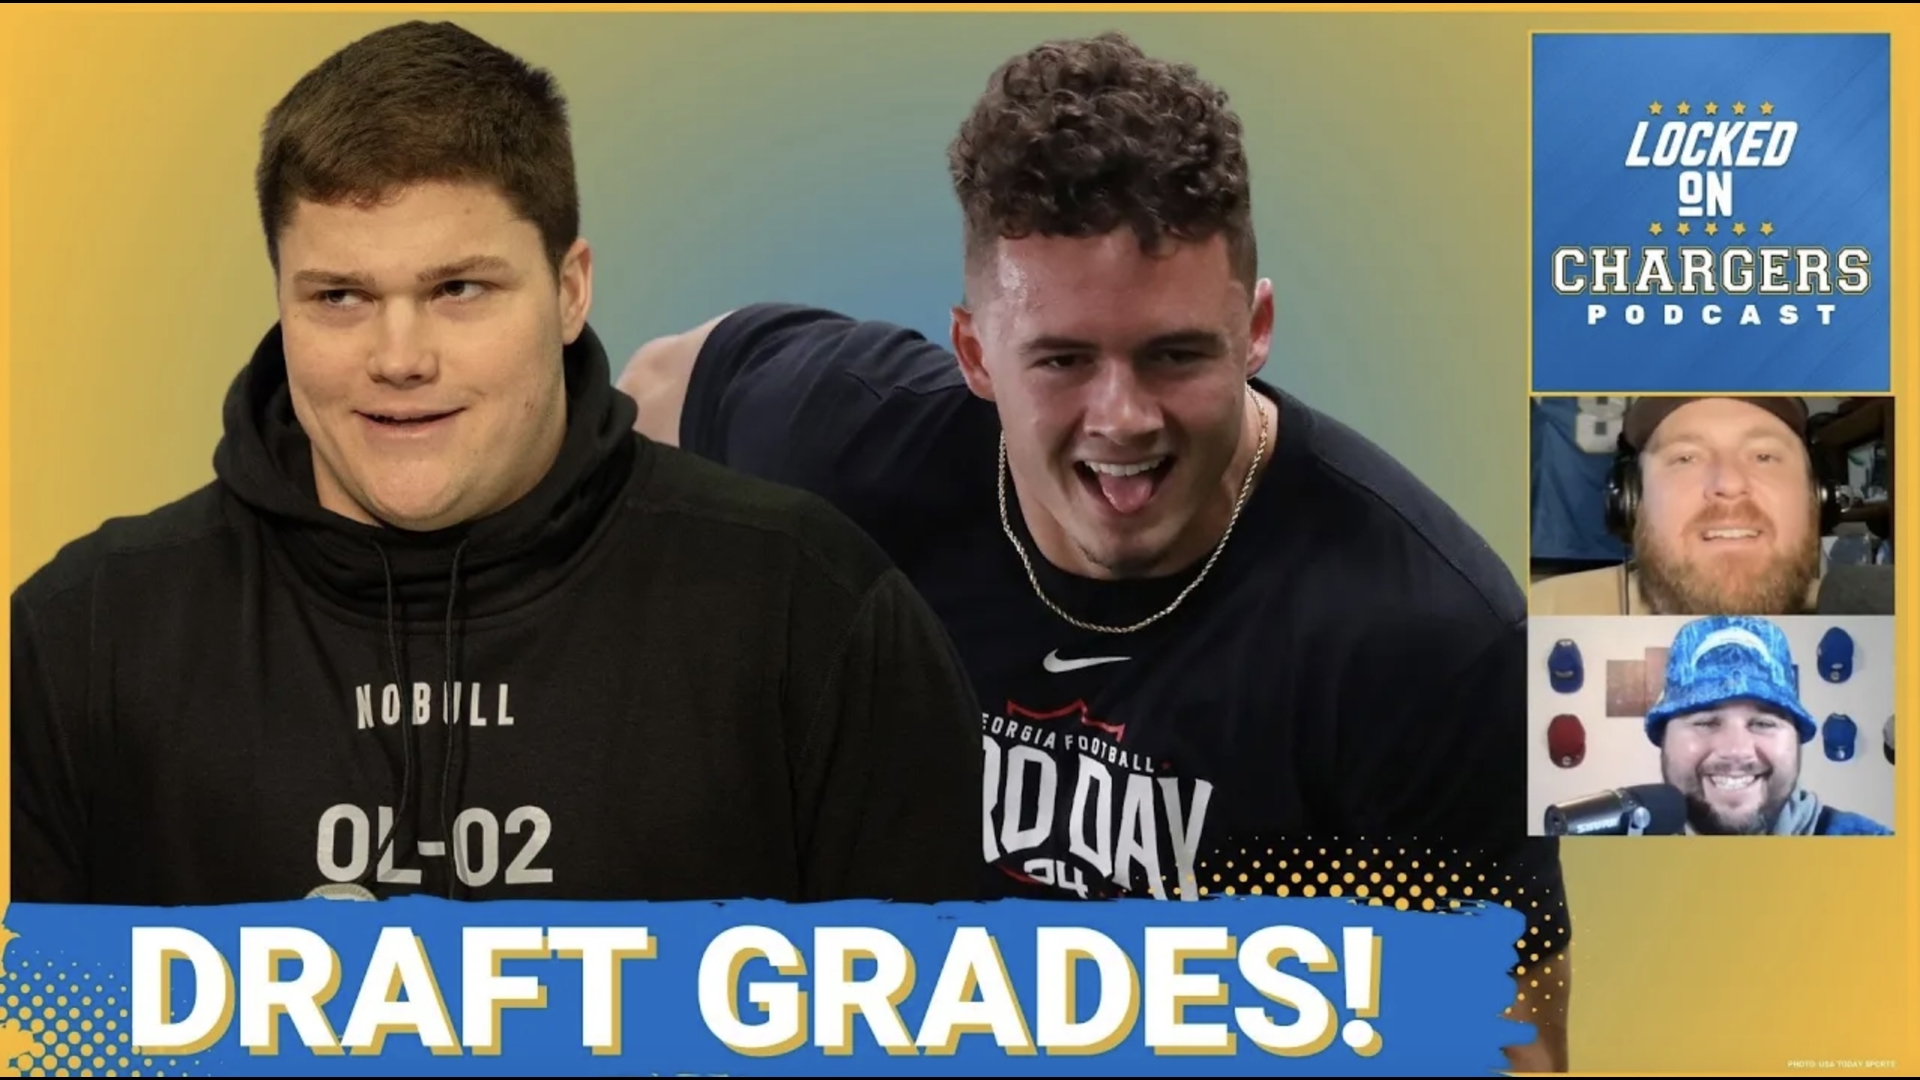 The Draft looked VERY different under Jim Harbaugh and Joe Hortiz, and it was hard not to give their draft class glowing remarks with the impact players brought in.